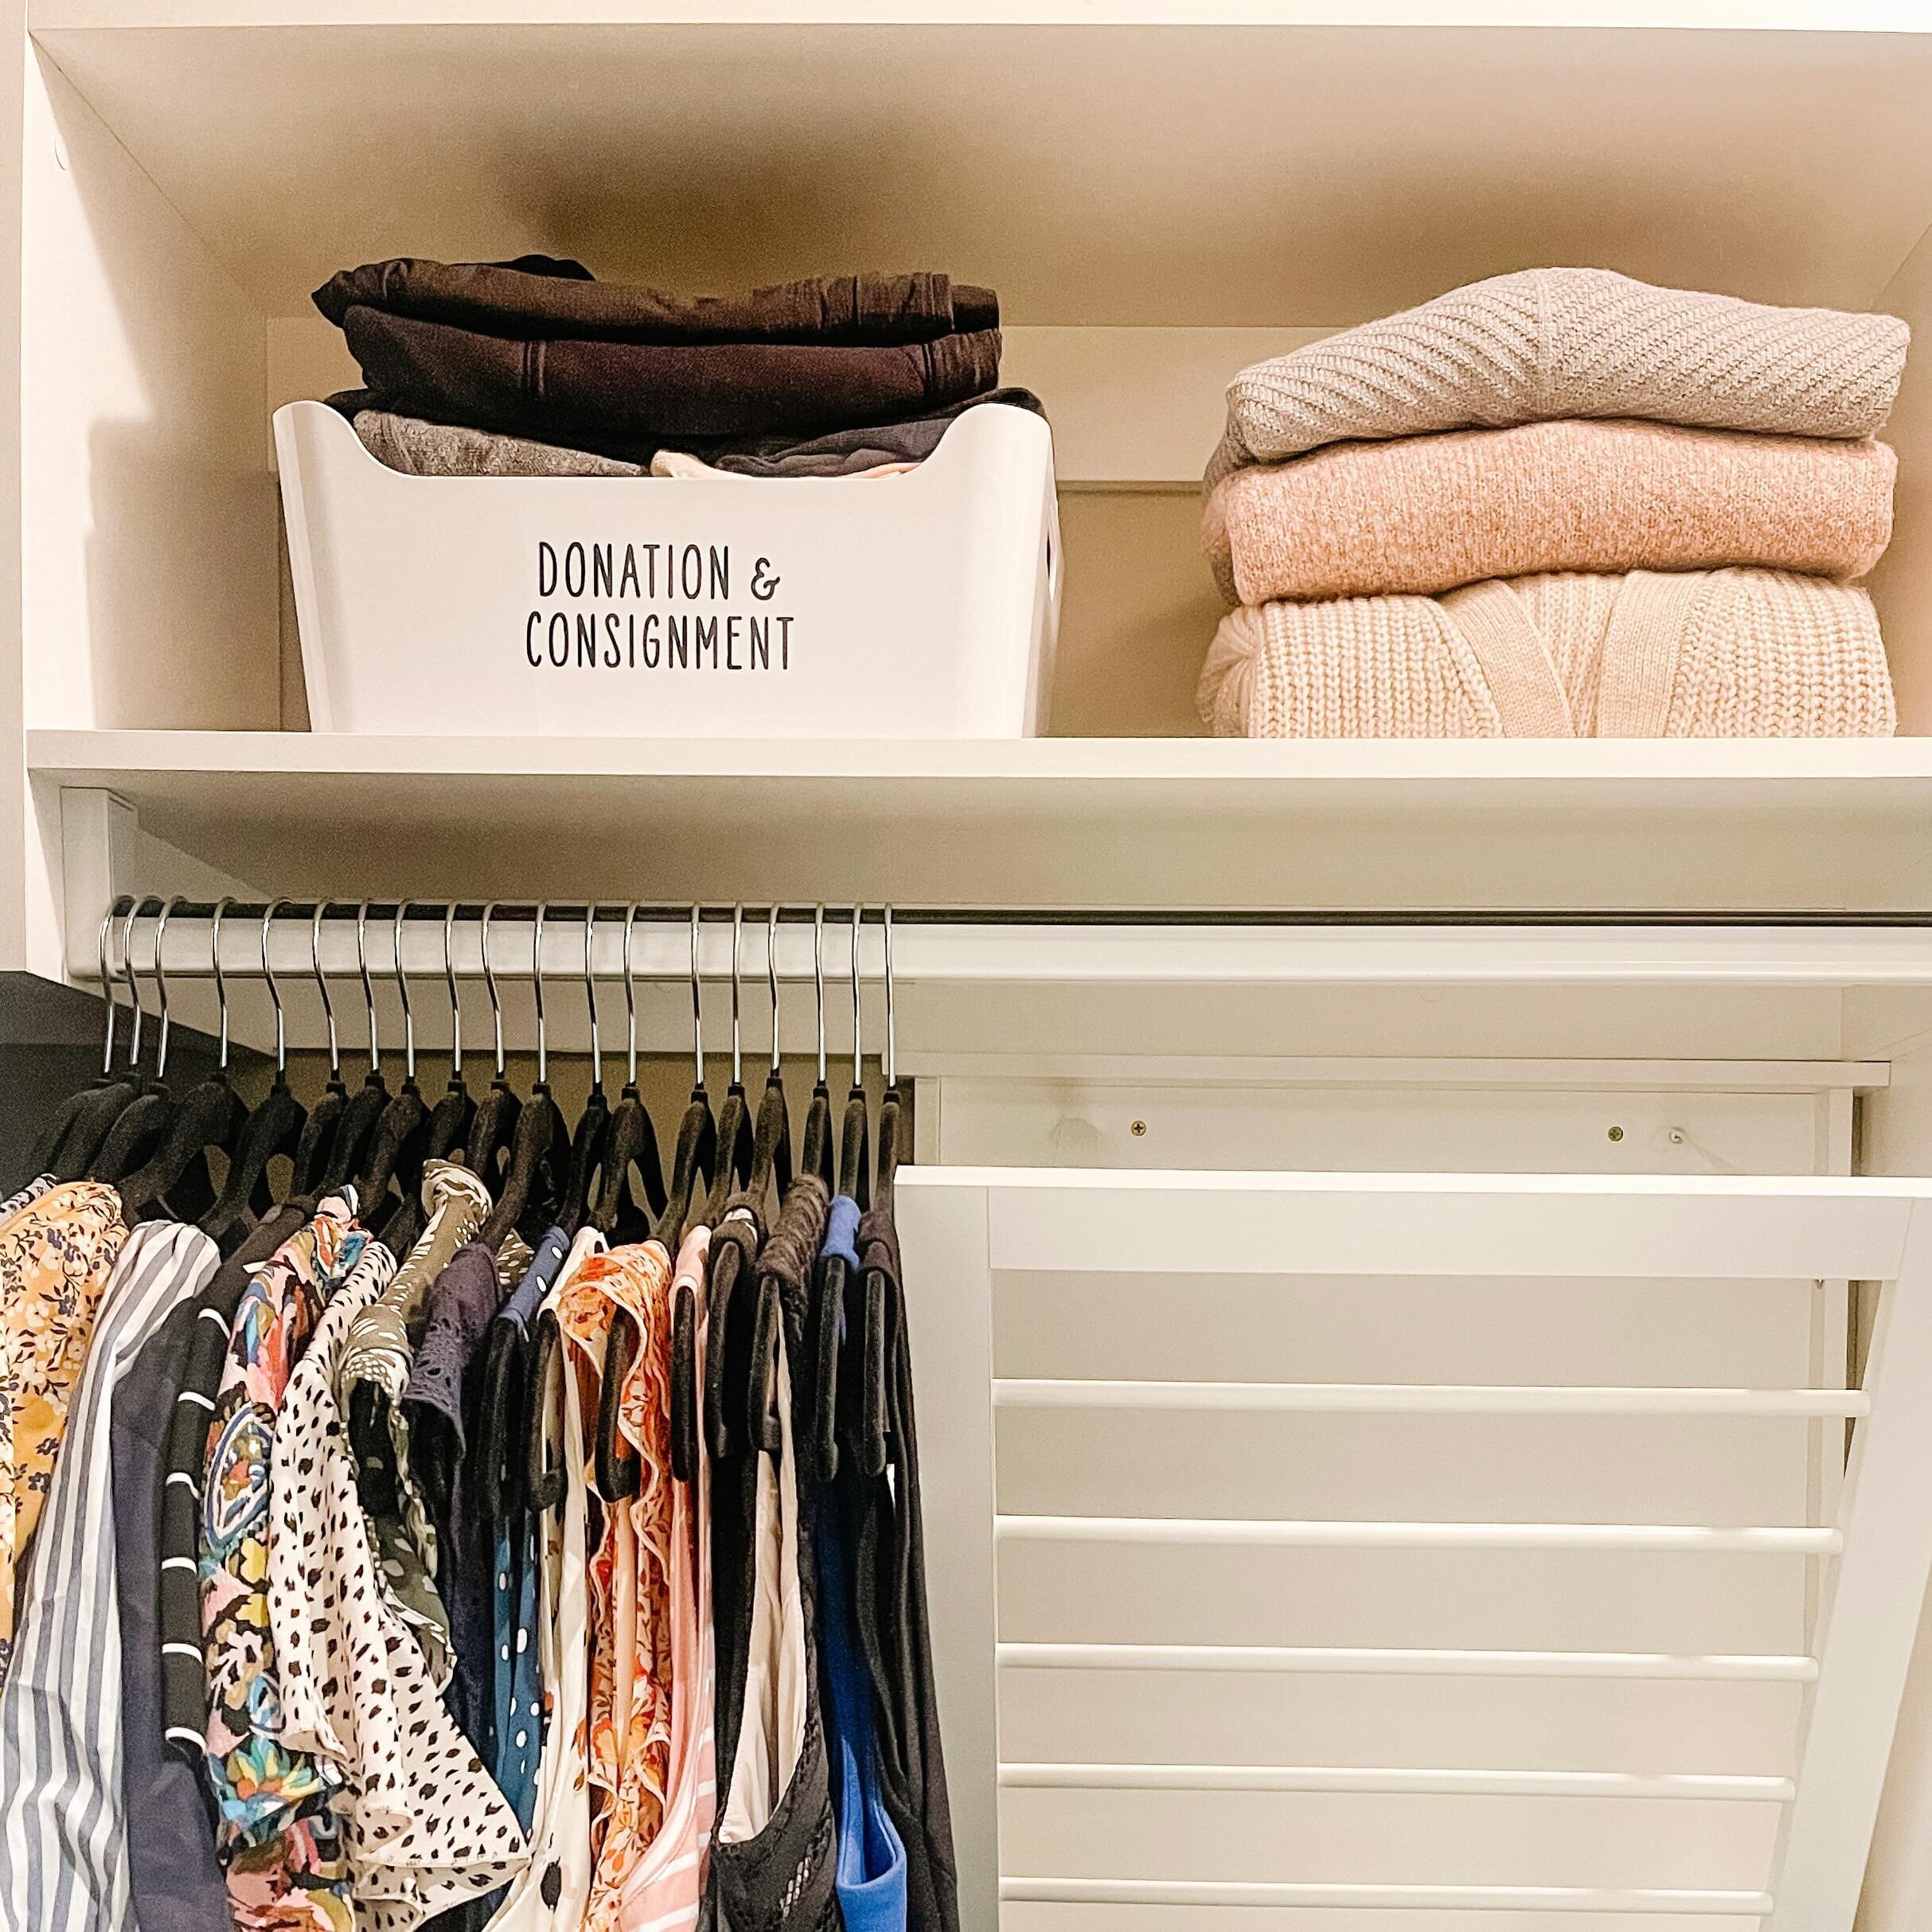 Love to shop, but don&rsquo;t want an overwhelming closet? 

Checkout our latest blog post - Decluttering | Closet Systems

👚Comment &ldquo;Love to Shop&rdquo; below and I&rsquo;ll DM you the link! 

#closetorganization #decluttermycloset